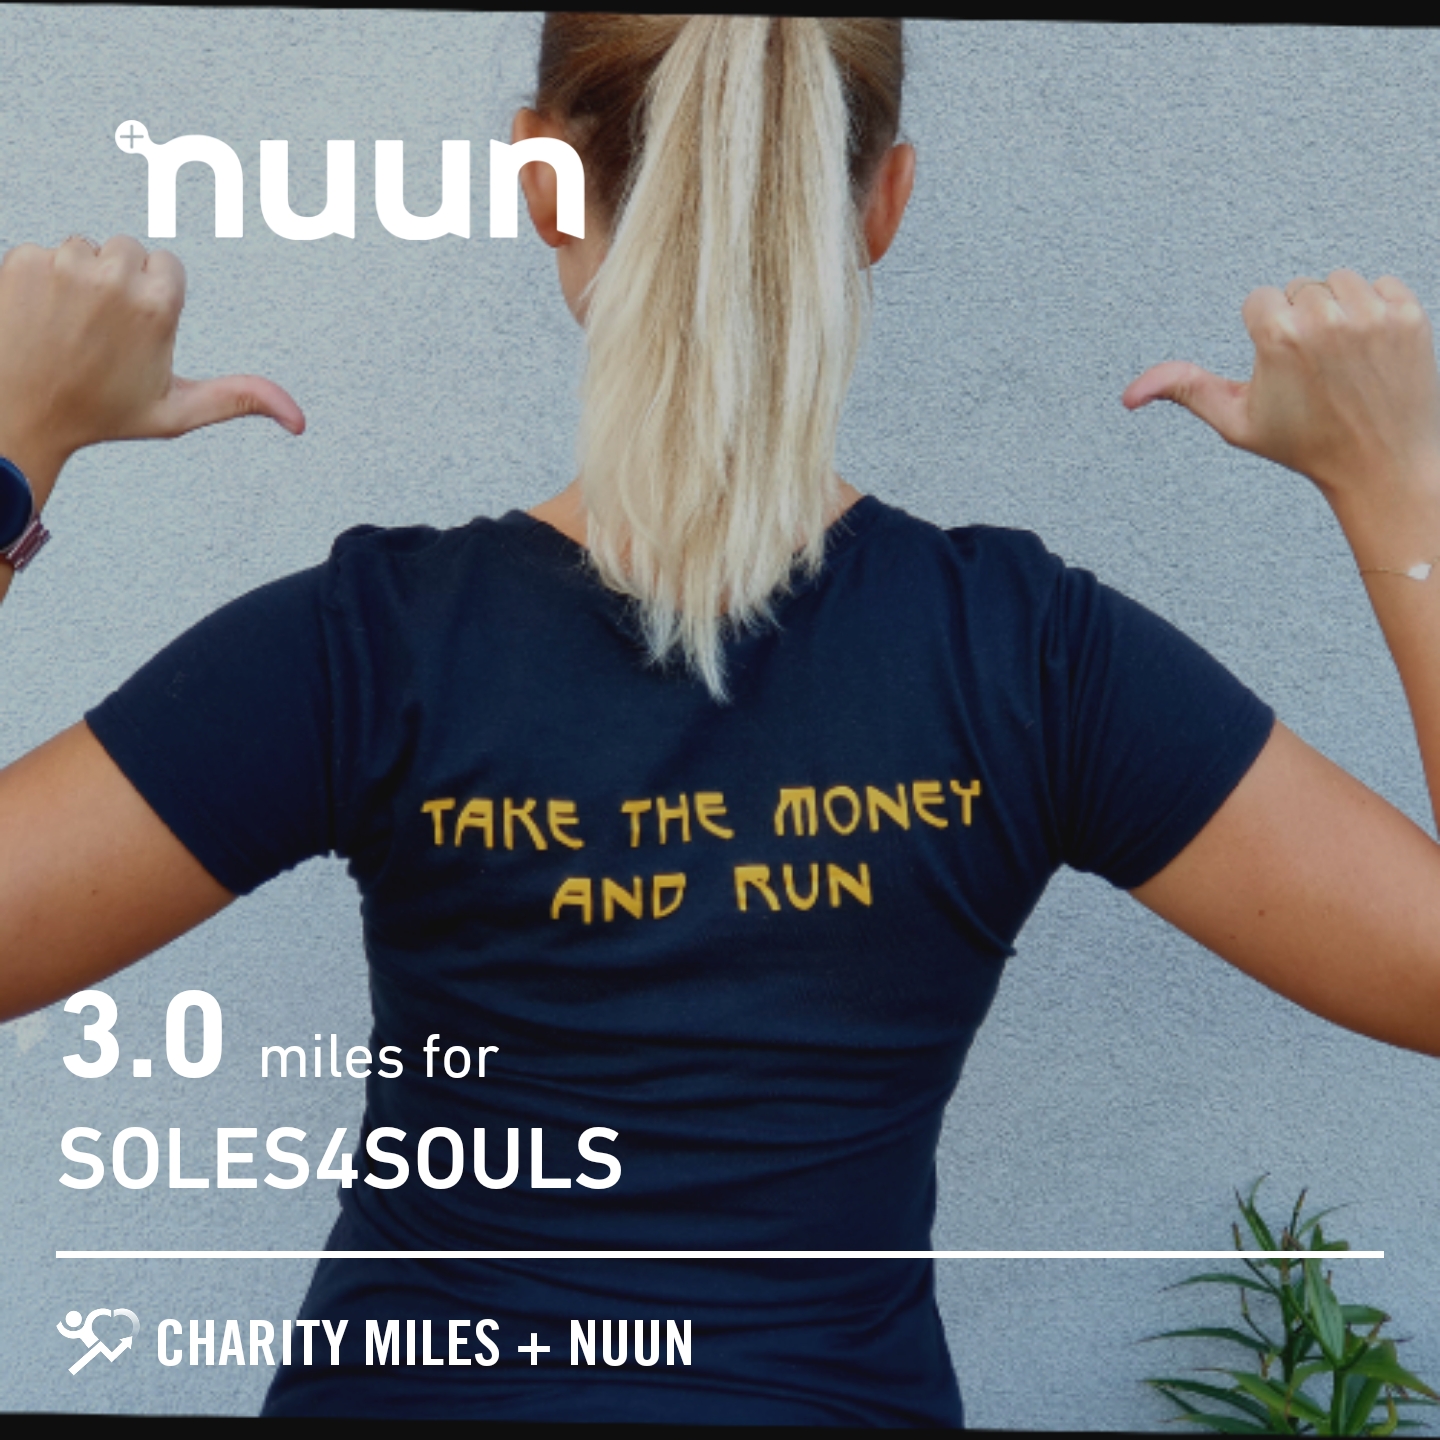 Semperit employee wearing a t-shirt reading "Take the money and run"